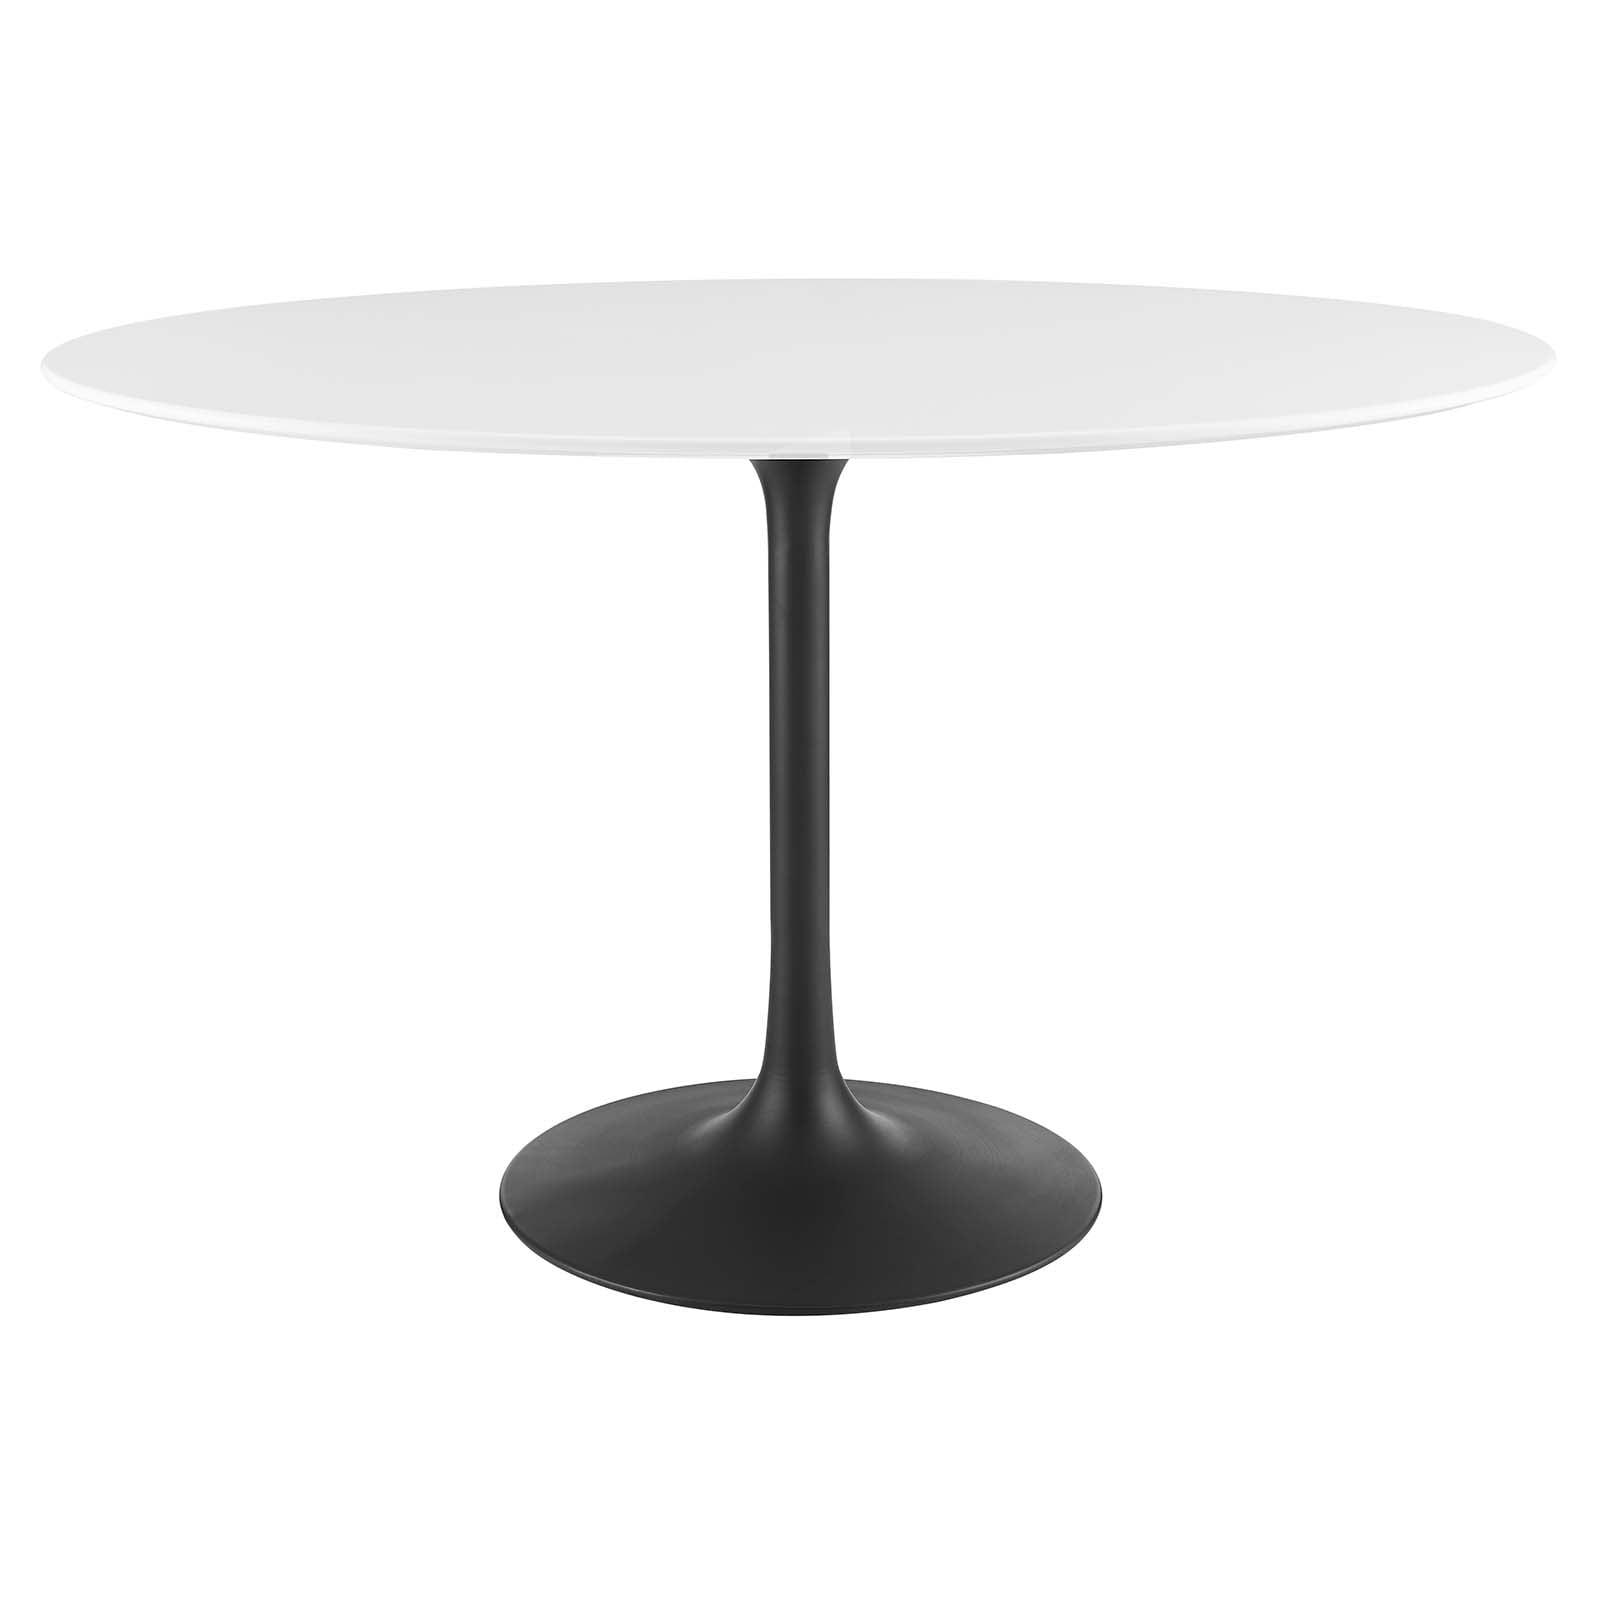 Contemporary Oval Wood Dining Table with Sleek Metal Base - Black and White